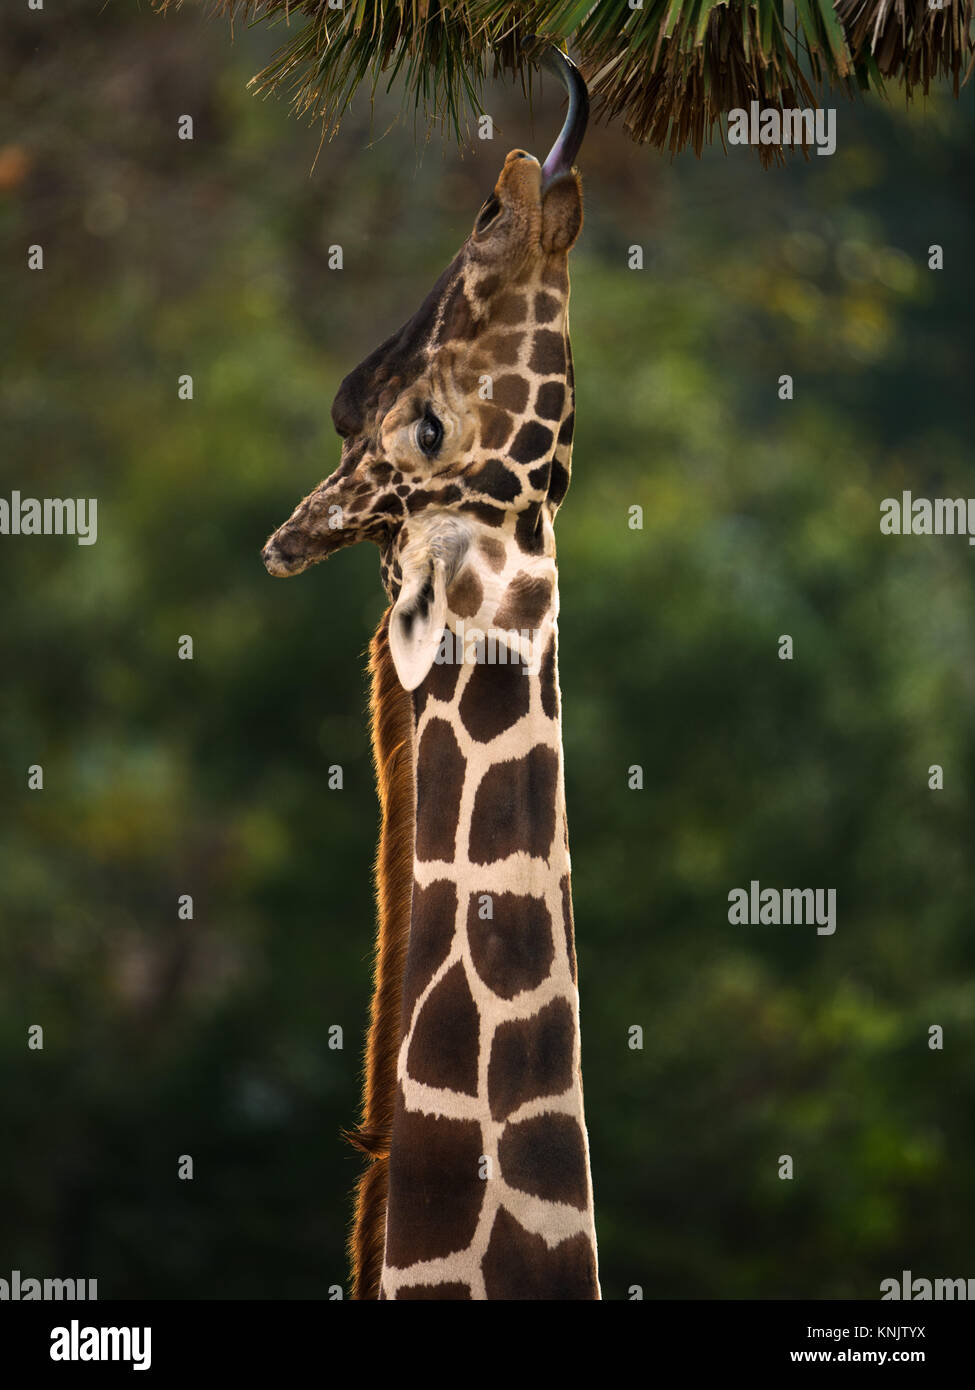 Miami, Forida, USA. 1st Dec, 2013. A giraffe reaches for a bite of a palm tree overhead. The giraffe is the tallest living terrestrial animals and the largest ruminants. They also have extremely long tongues ranging from 18-20 inches so help them reach food from above. Credit: Laura Heald/ZUMA Wire/Alamy Live News Stock Photo